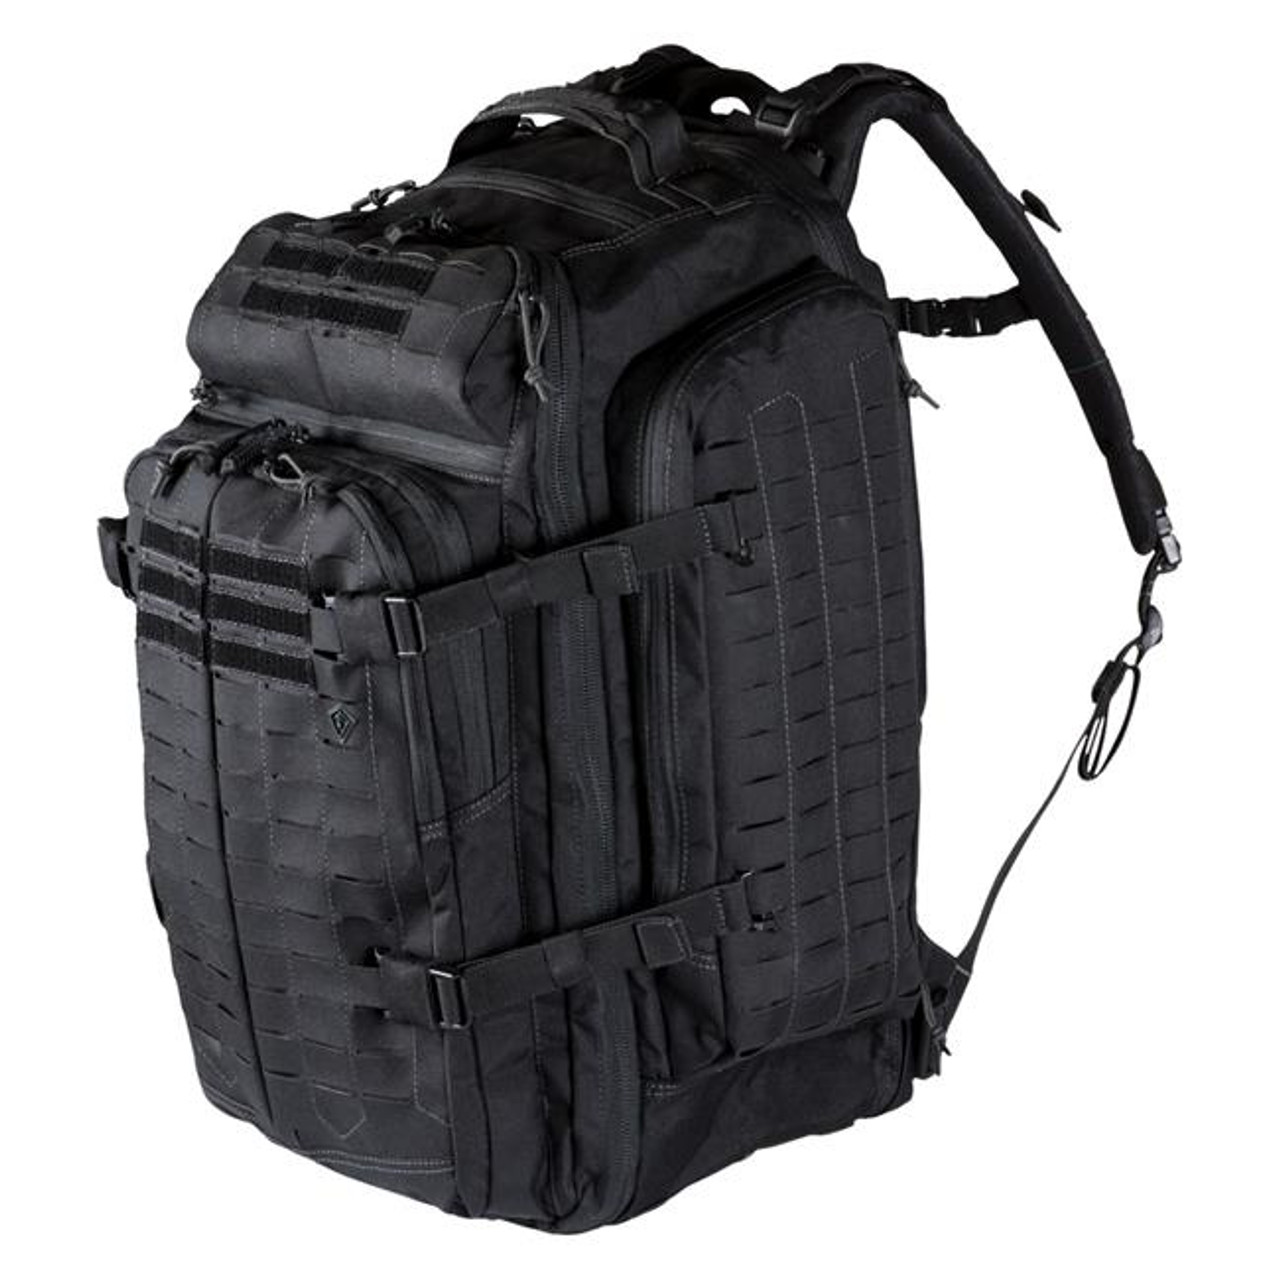 Black Tactix 3 Day Backpack | Military Luggage